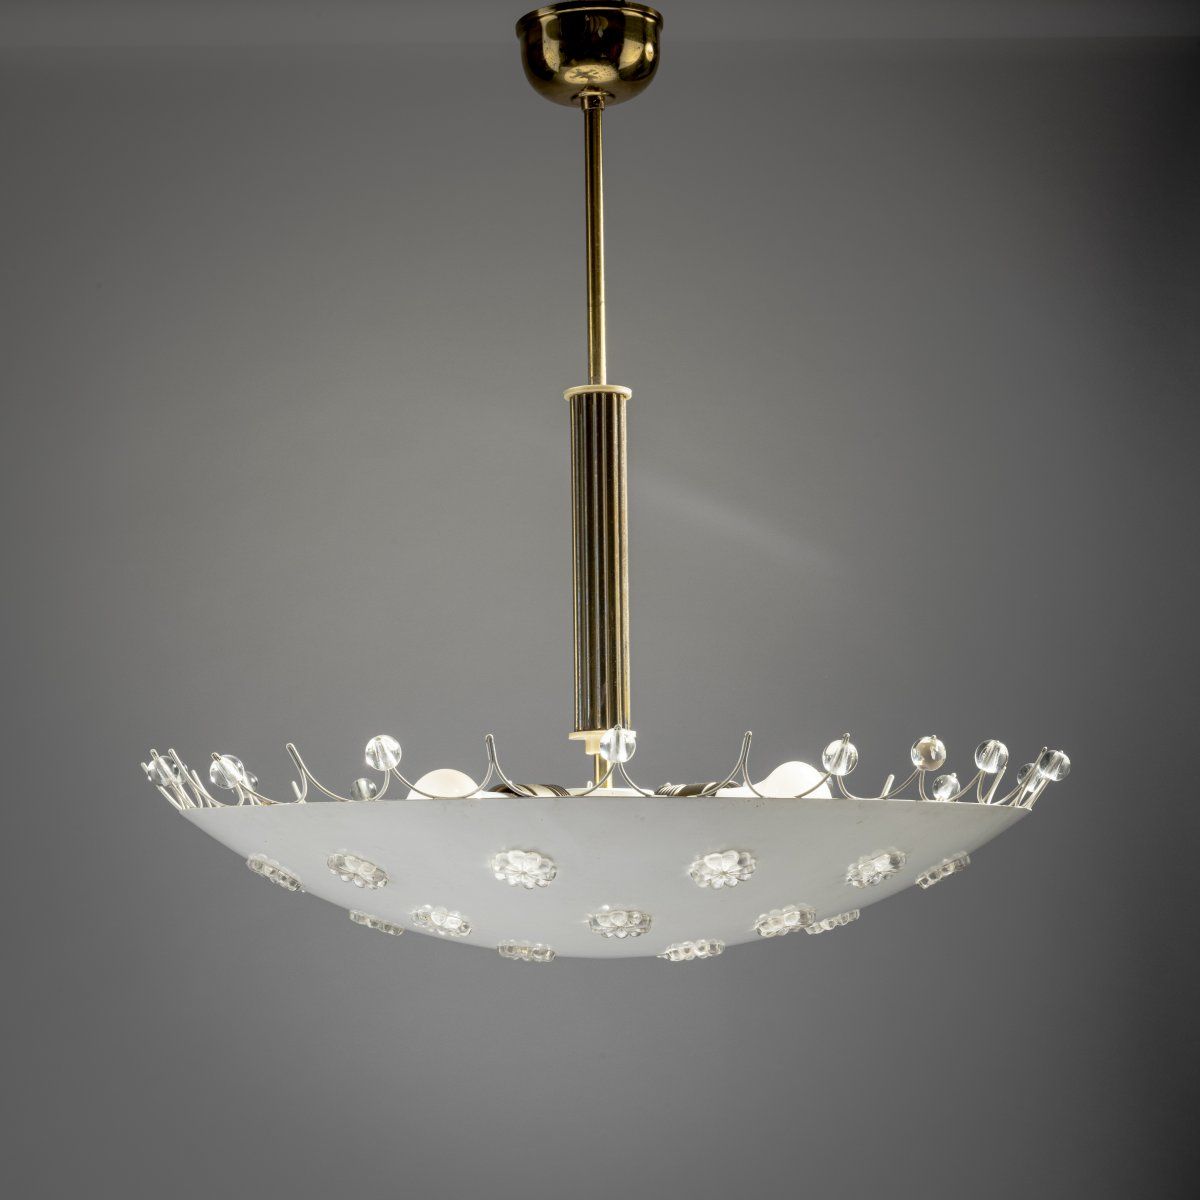 Null Emil Stejnar (style), Ceiling light, 1950s, H. 48 cm, D. 49.5 cm. Made by A&hellip;